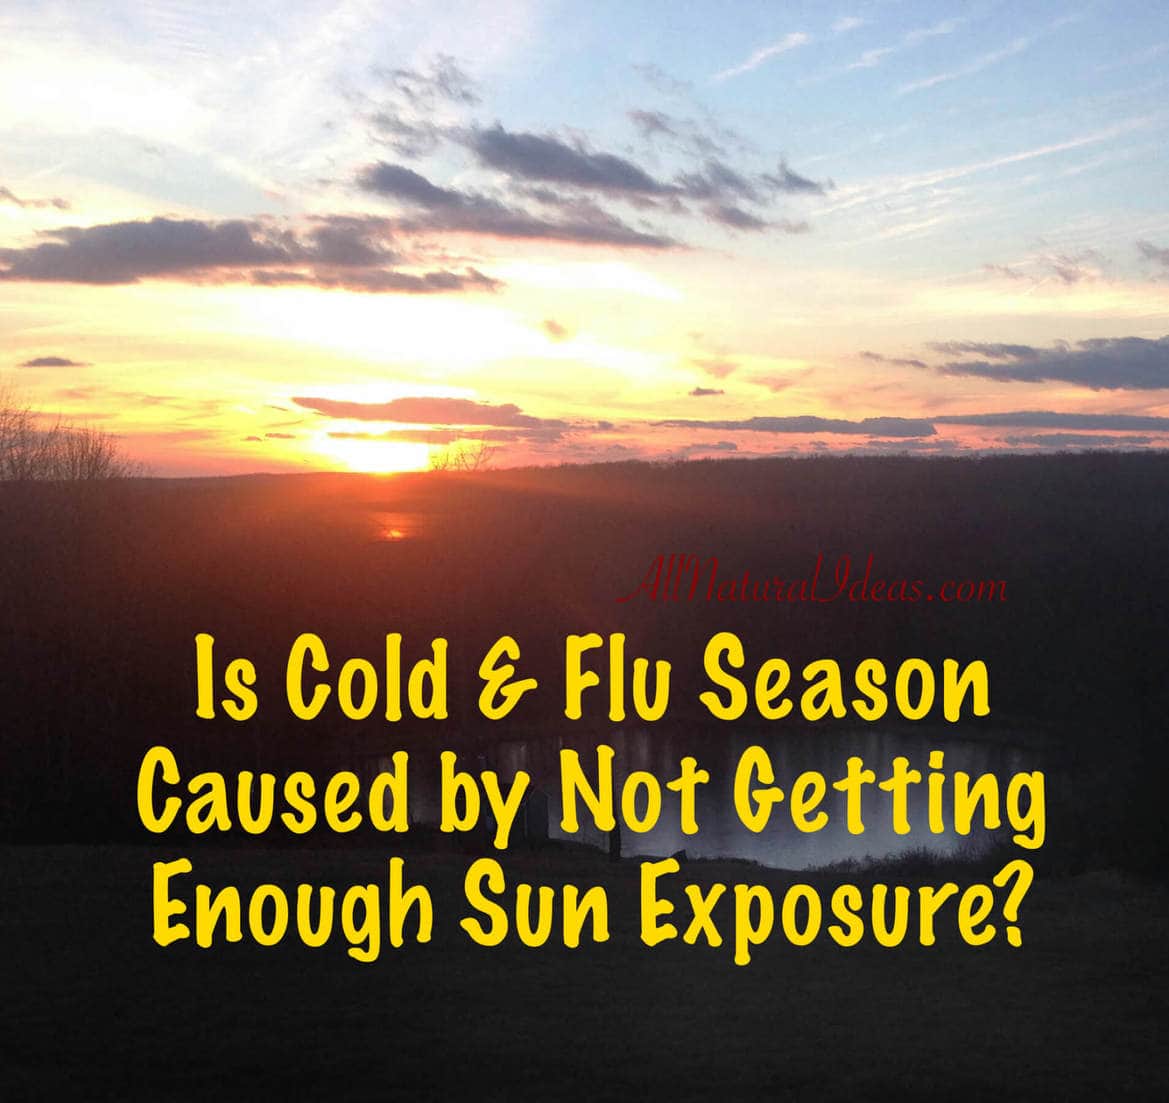 Vitamin D connection to Cold and Flu Season